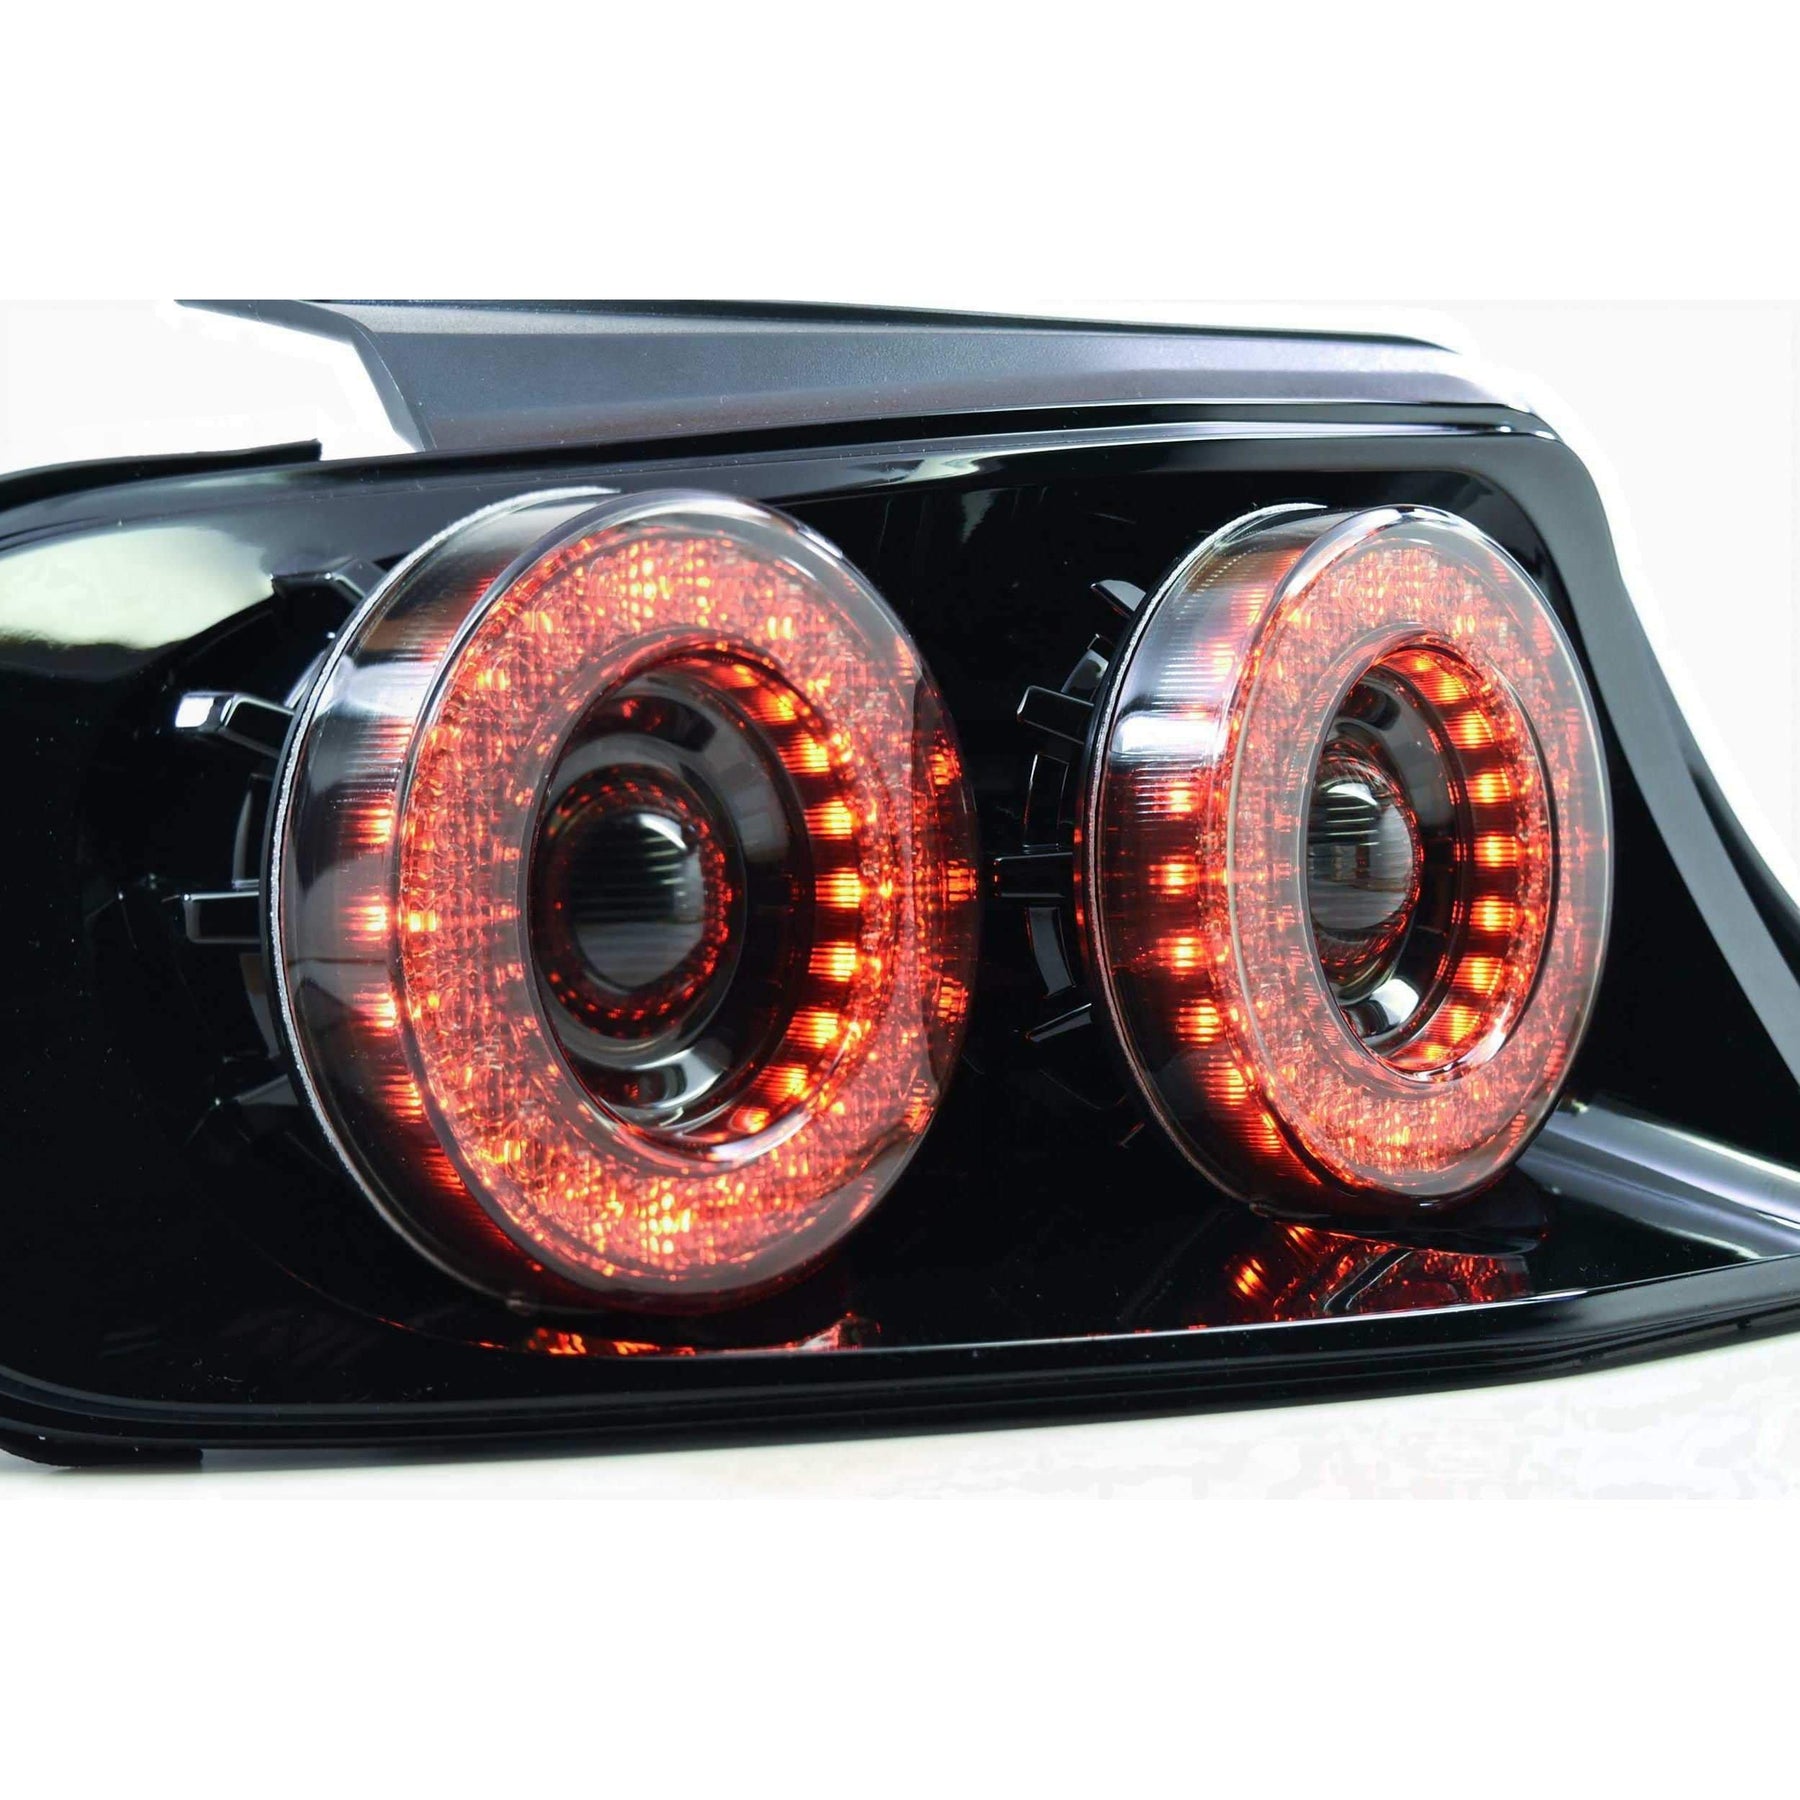 *Discontinued* 2013-2014 Mustang XB LED Red Tail lights (LF421)-Tail Lights-Morimoto-LF421-Dirty Diesel Customs